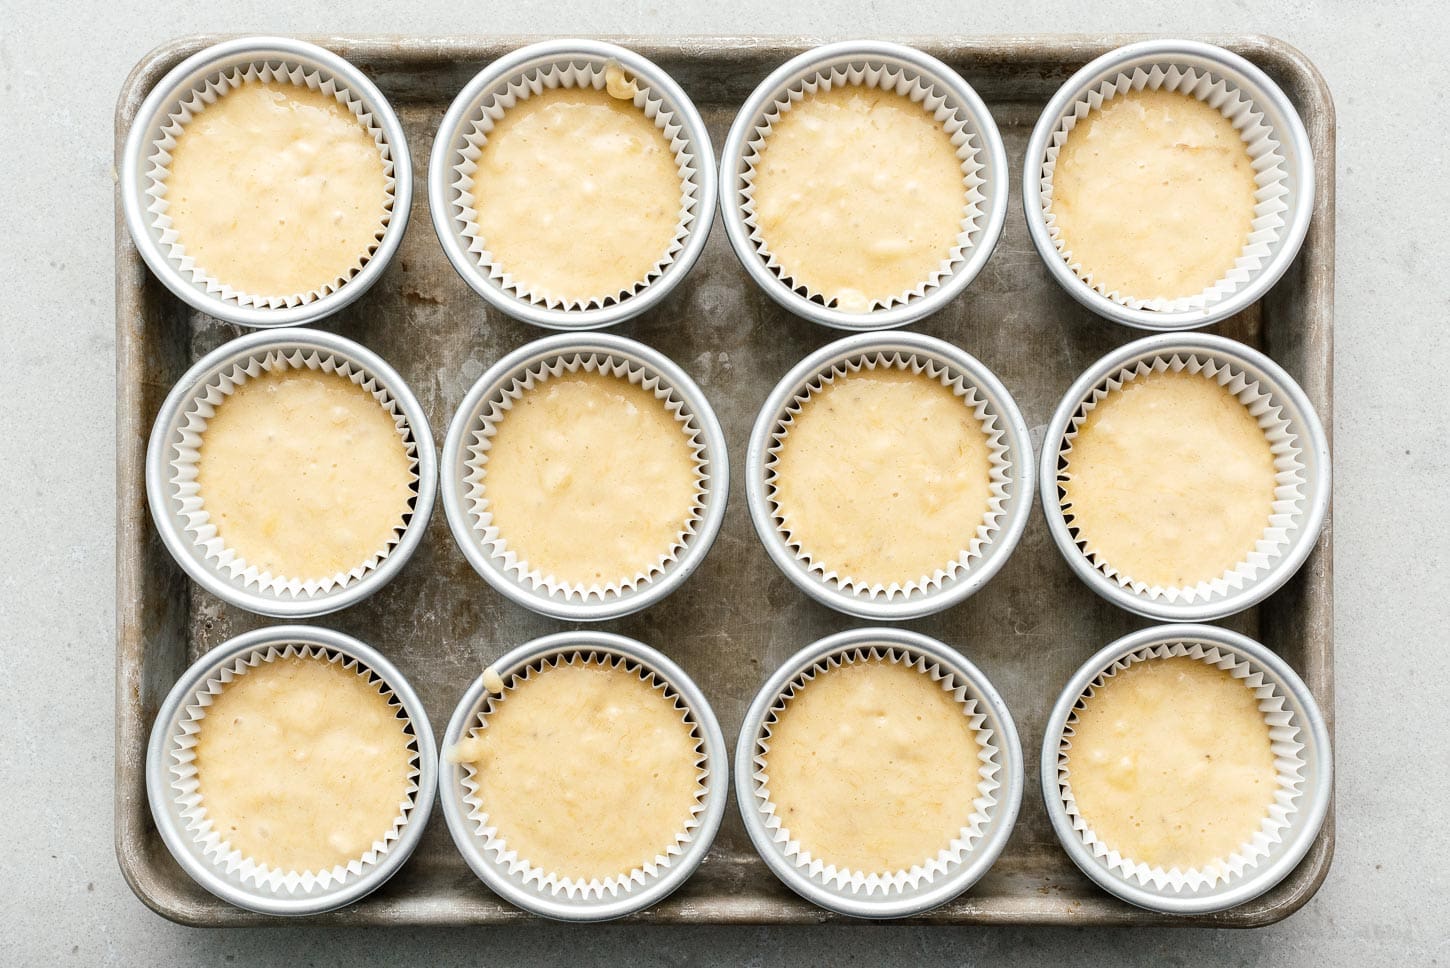 muffin batter in muffin tins | www.iamafoodblog.com